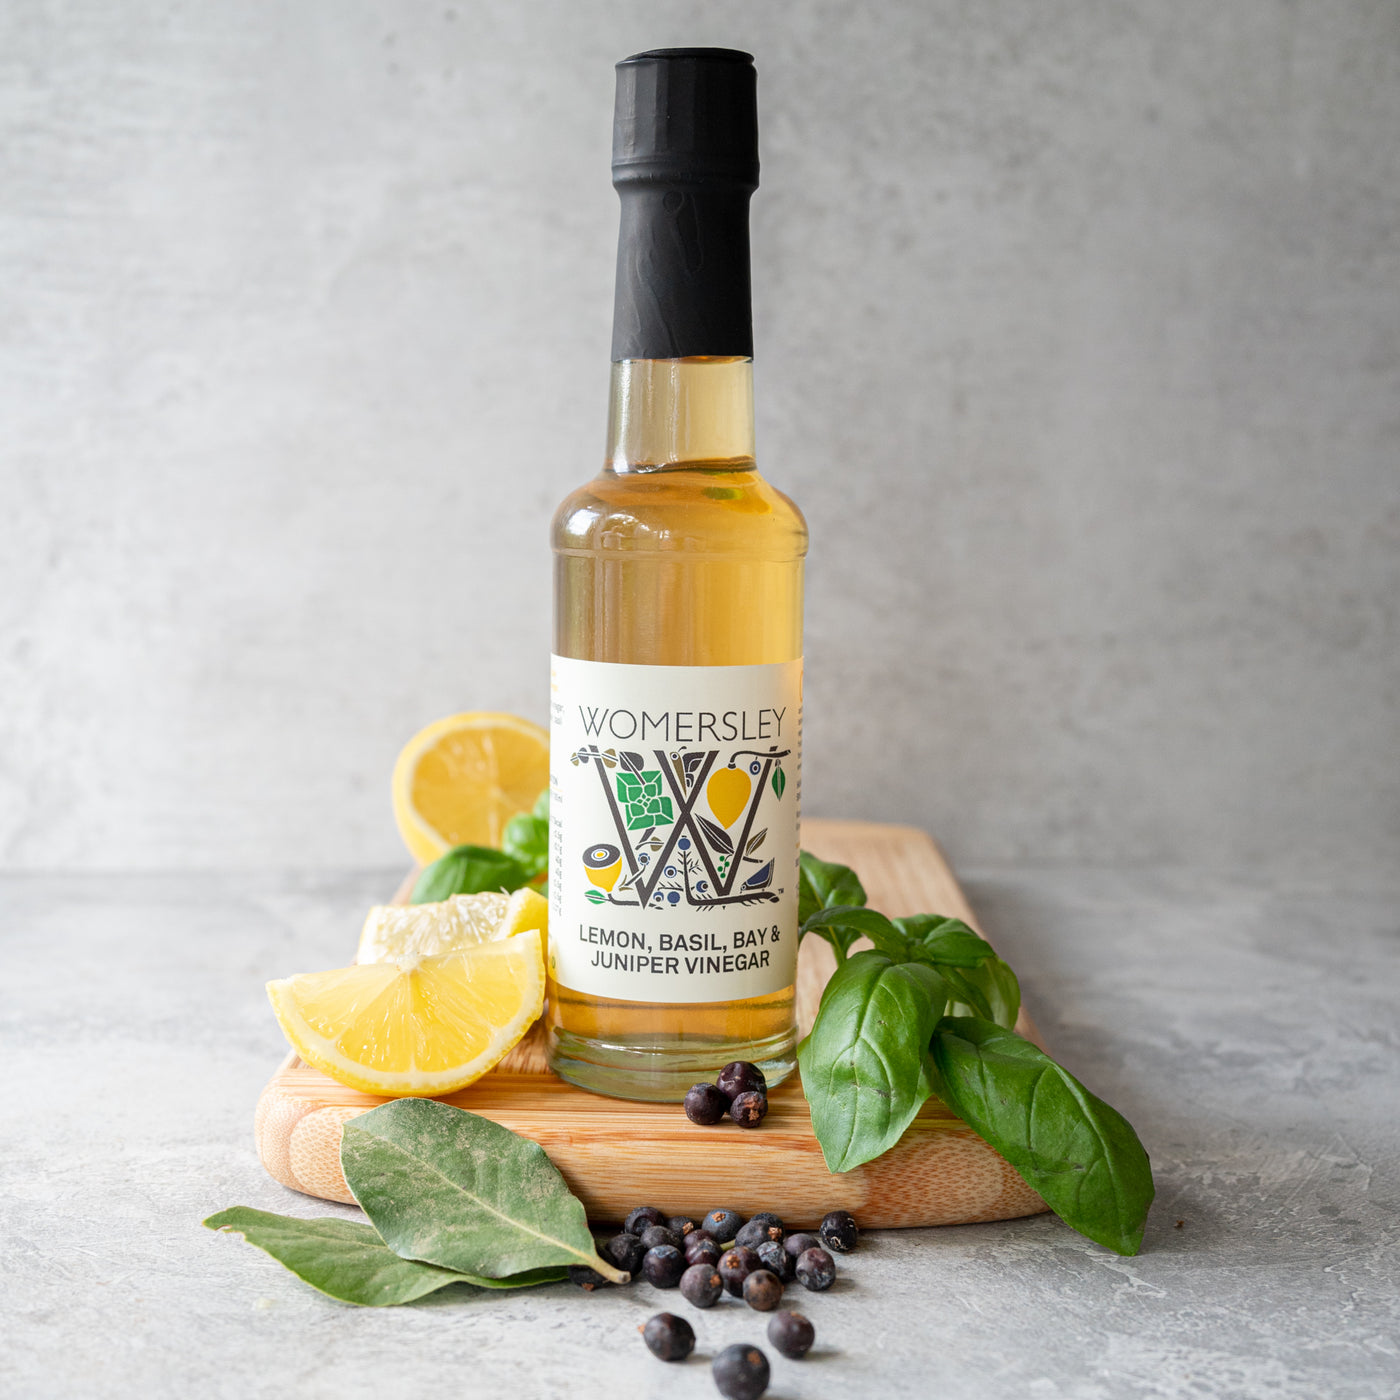 Womersley Foods 150ml Lemon, Basil, Bay & Juniper Fruit Vinegar standing on a cutting board with grey background surrounded by lemon, basil, bay and juniper ingredients.